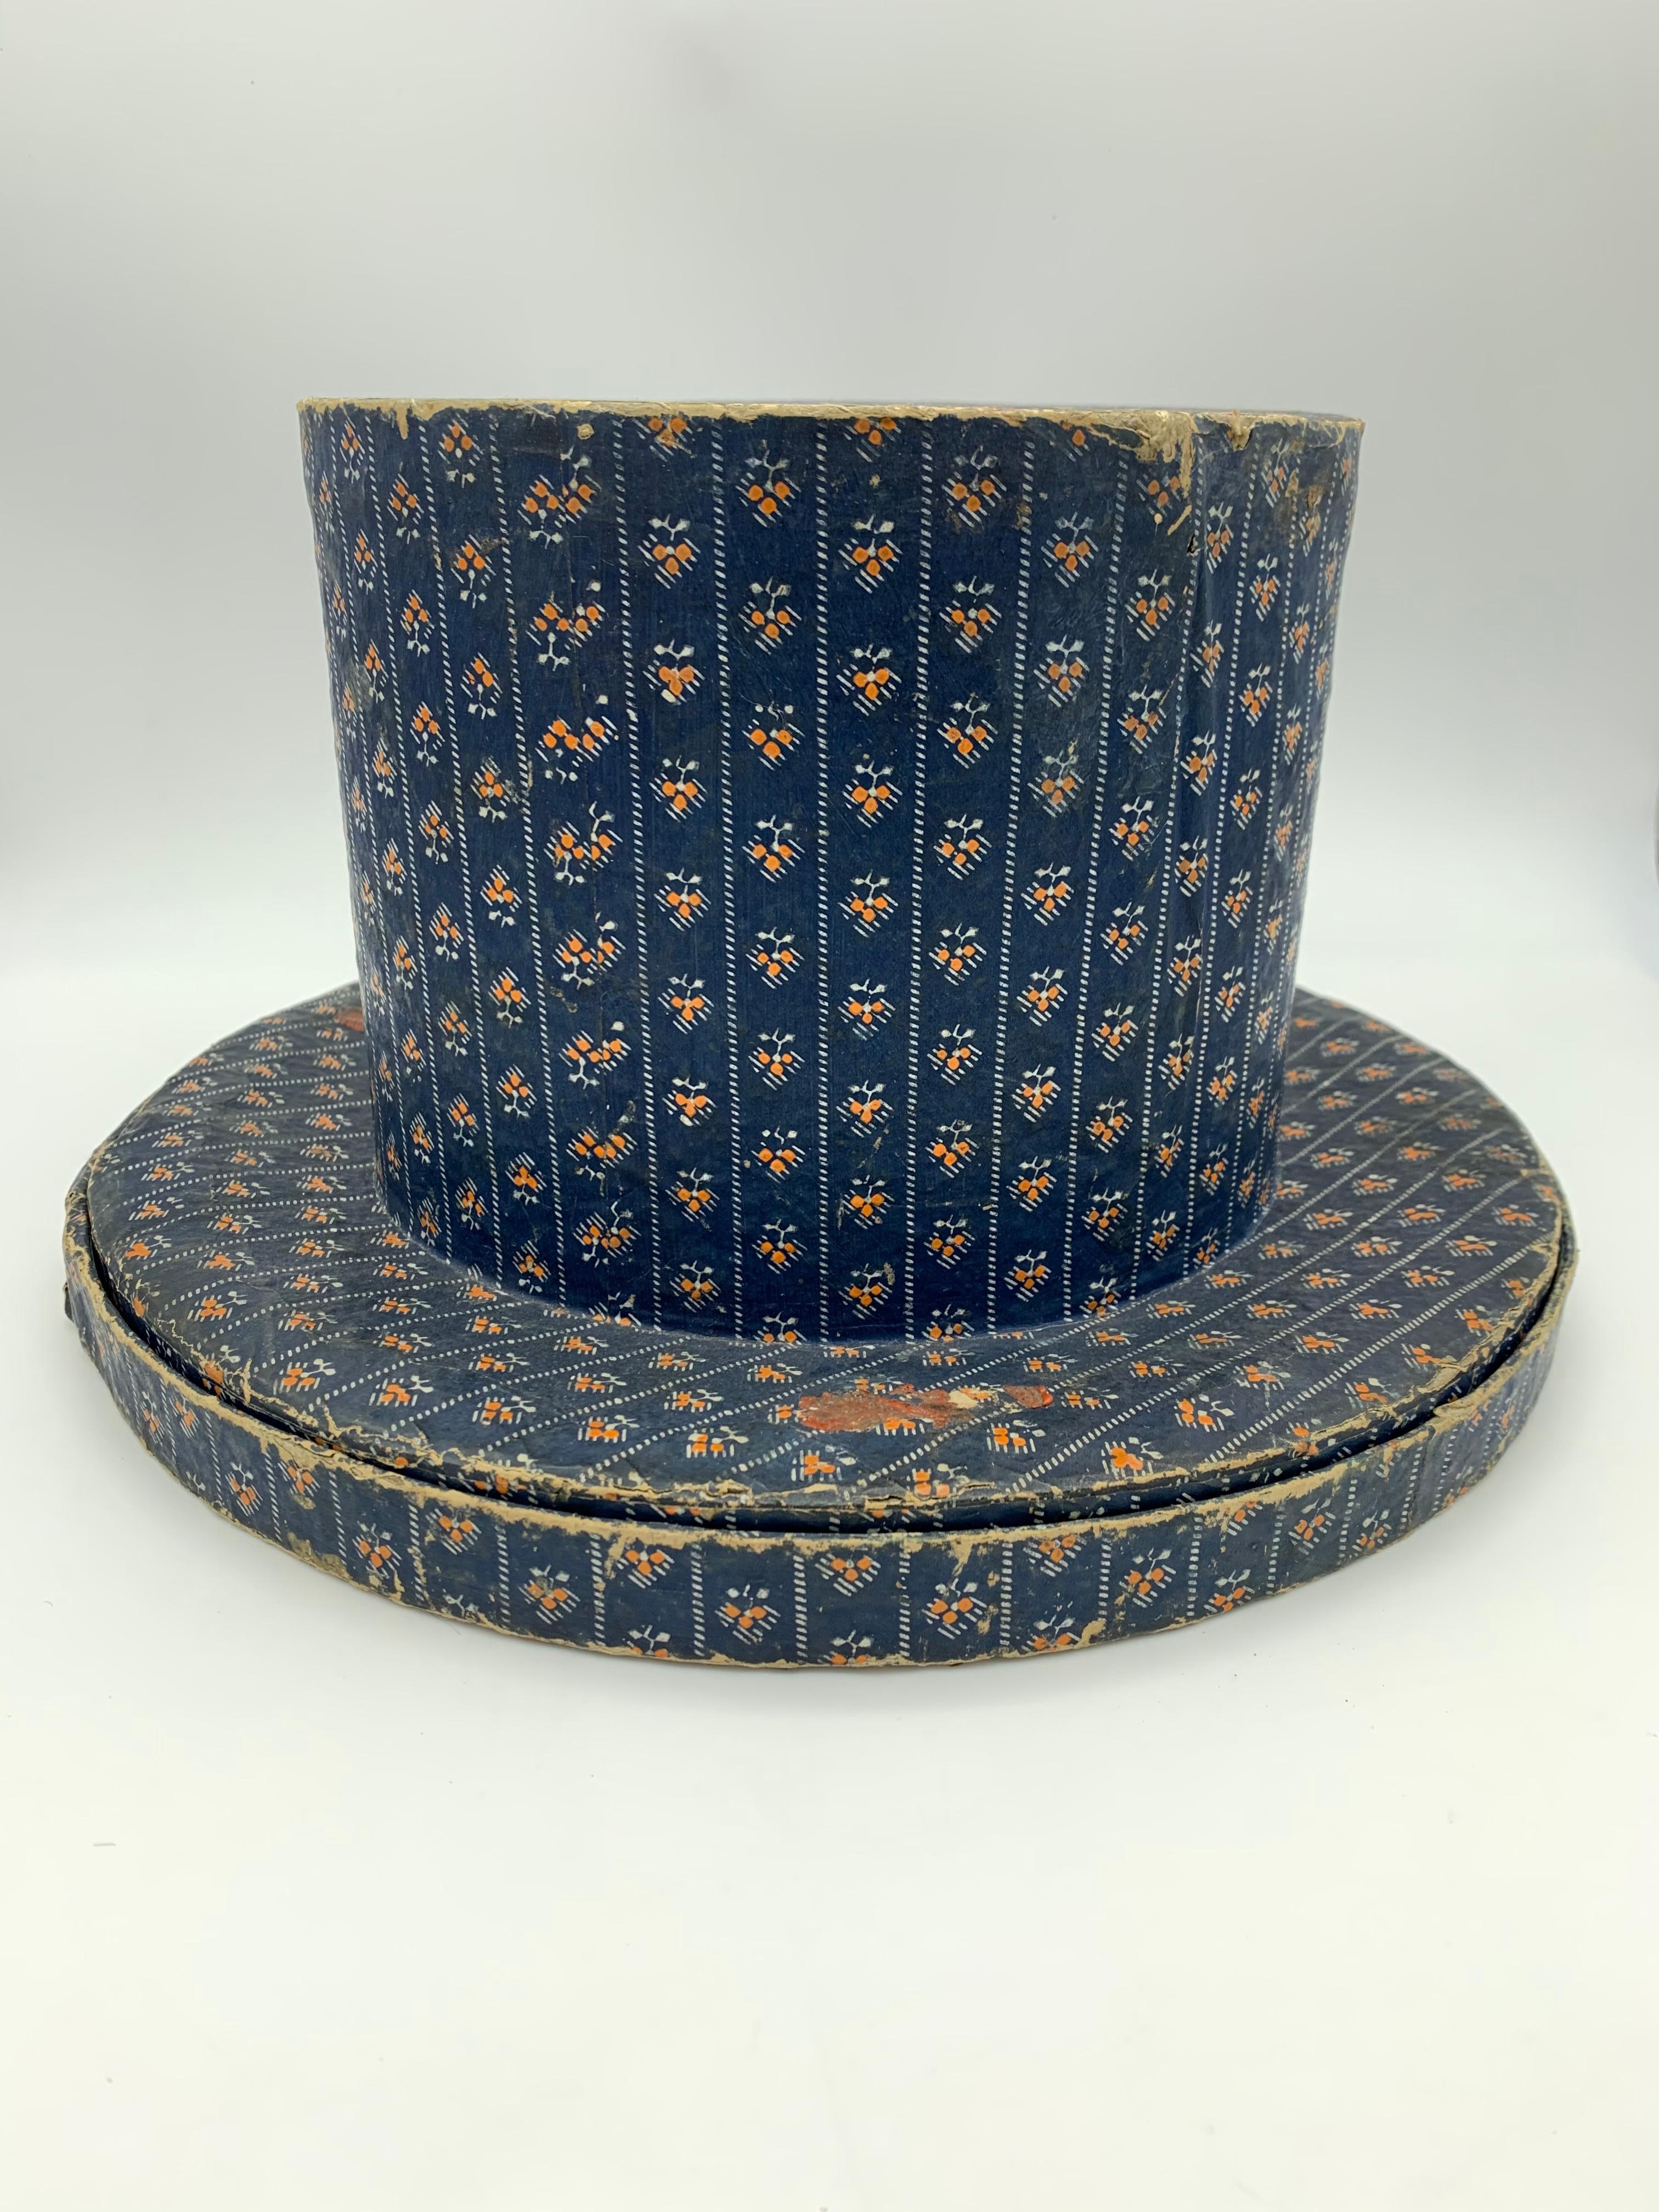 Very rare hat box for a gentleman's top hat made out of hand printed carton.
Considering the frailty of the material this very rare object is in surprisingly good condition. There are probably not many examples left in the world. This collectible